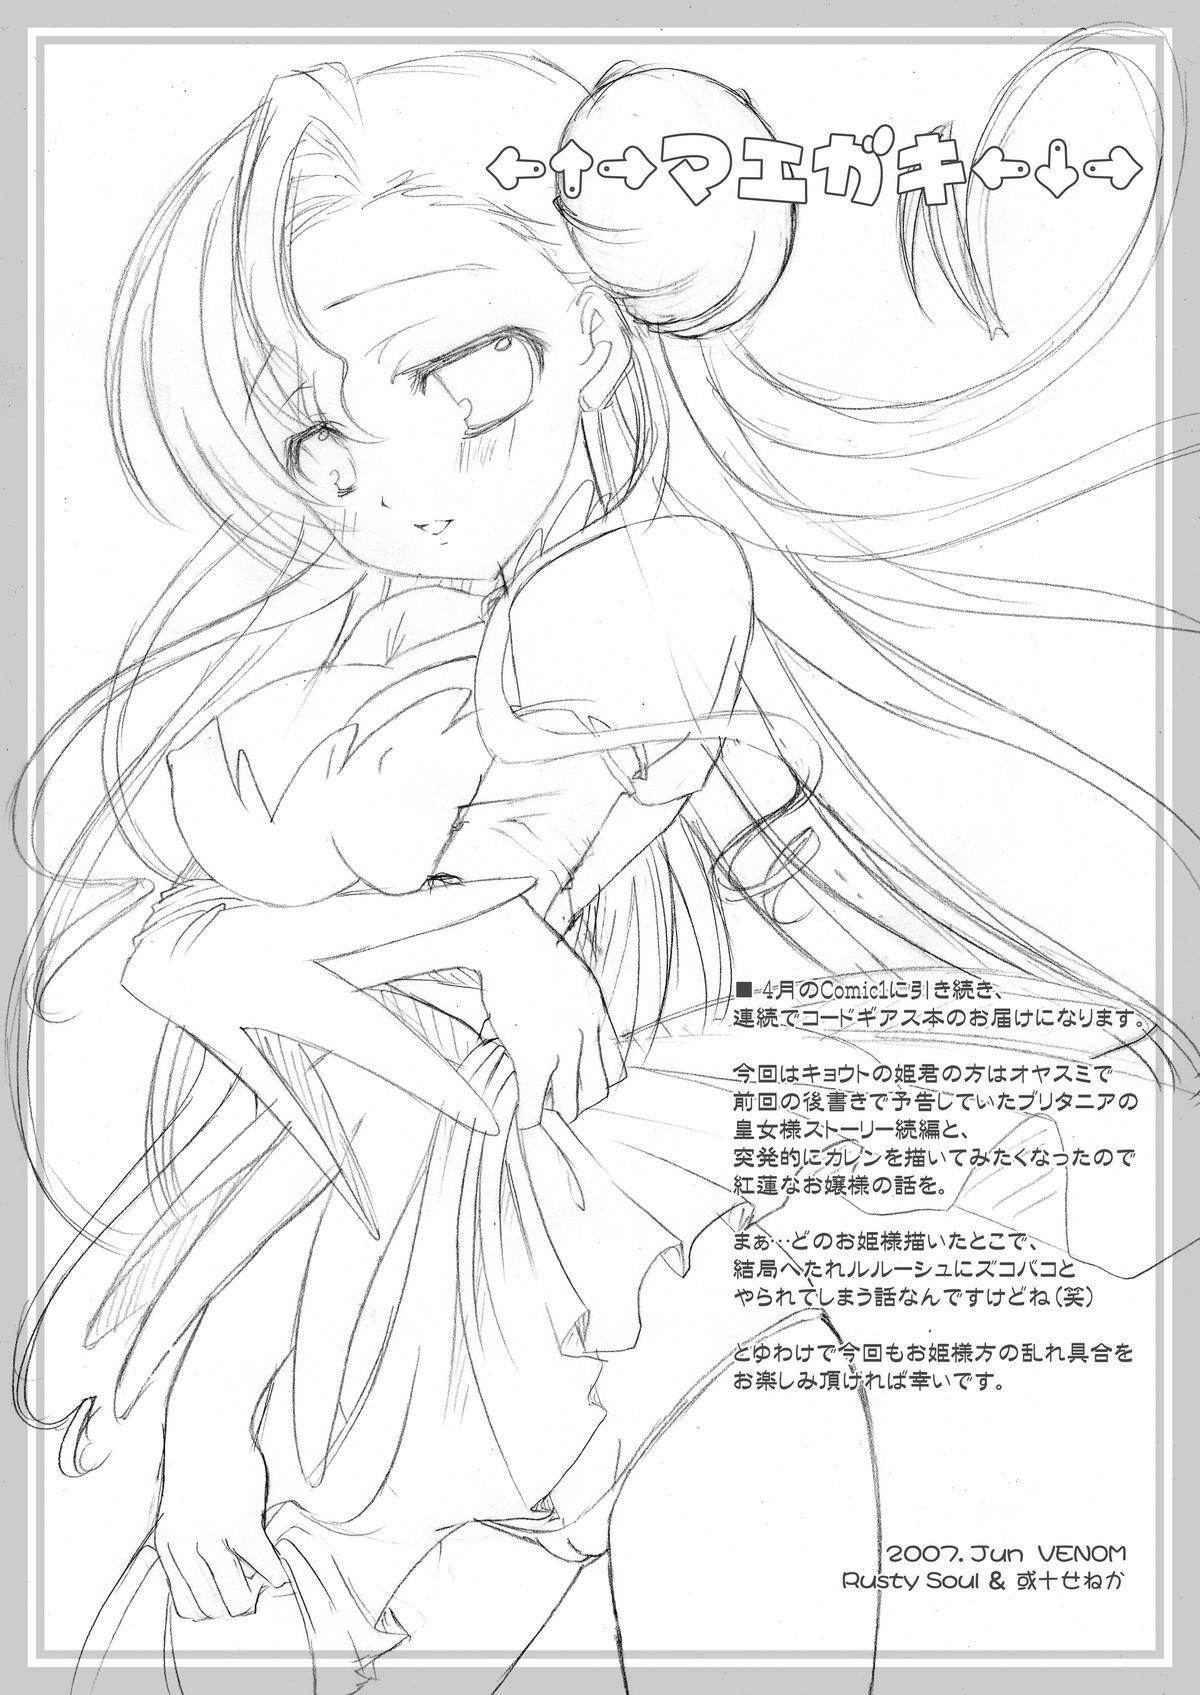 Compilation Kouhime Benihime - Code geass Asstomouth - Page 4